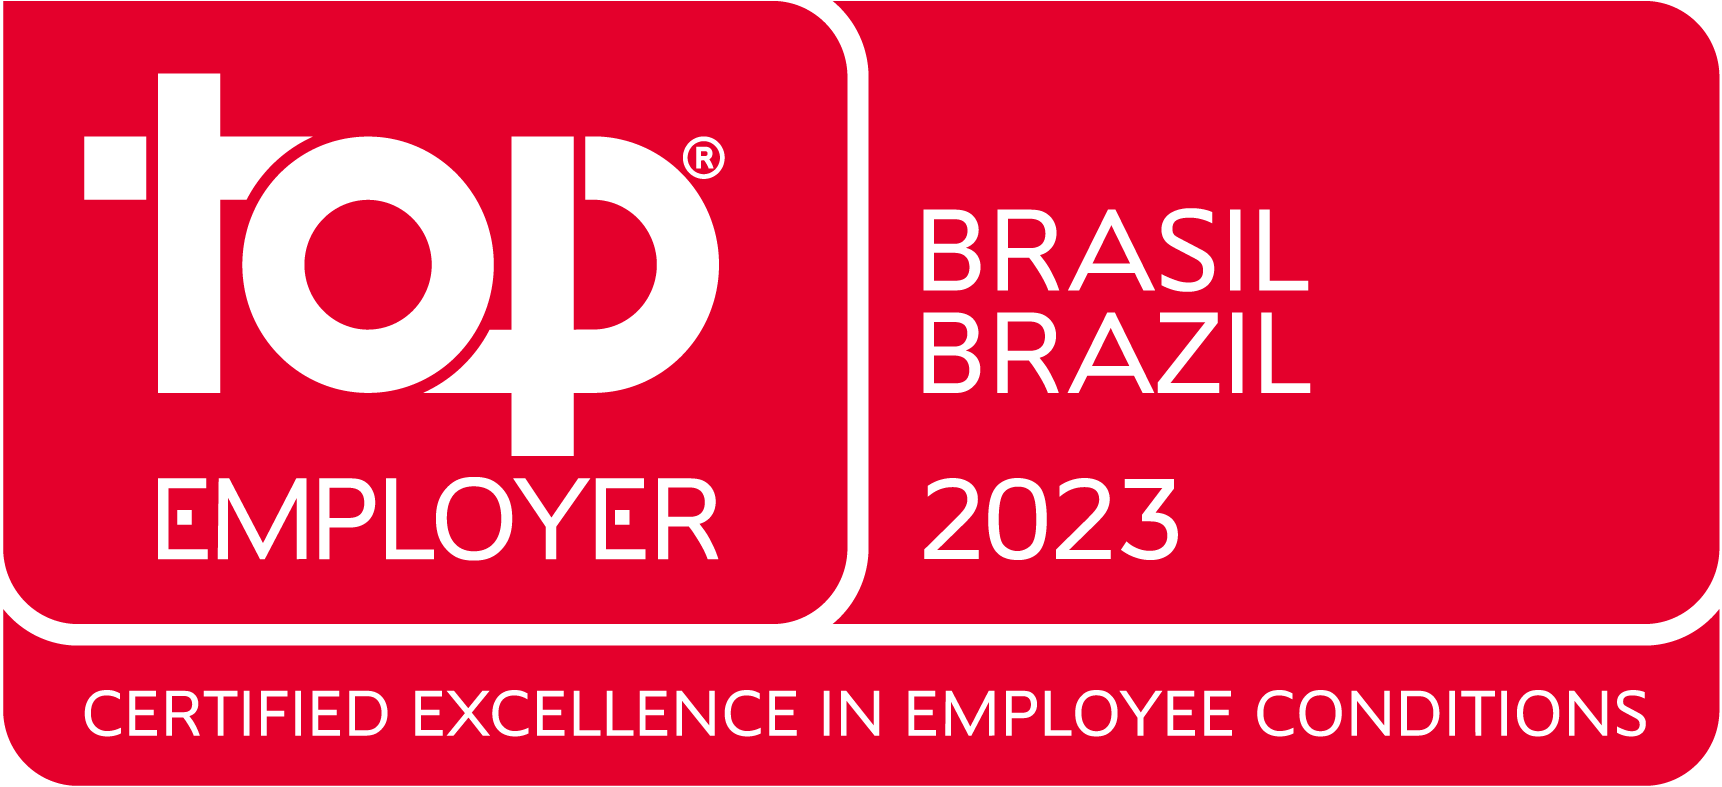 Top_Employer_Brazil_2023.png